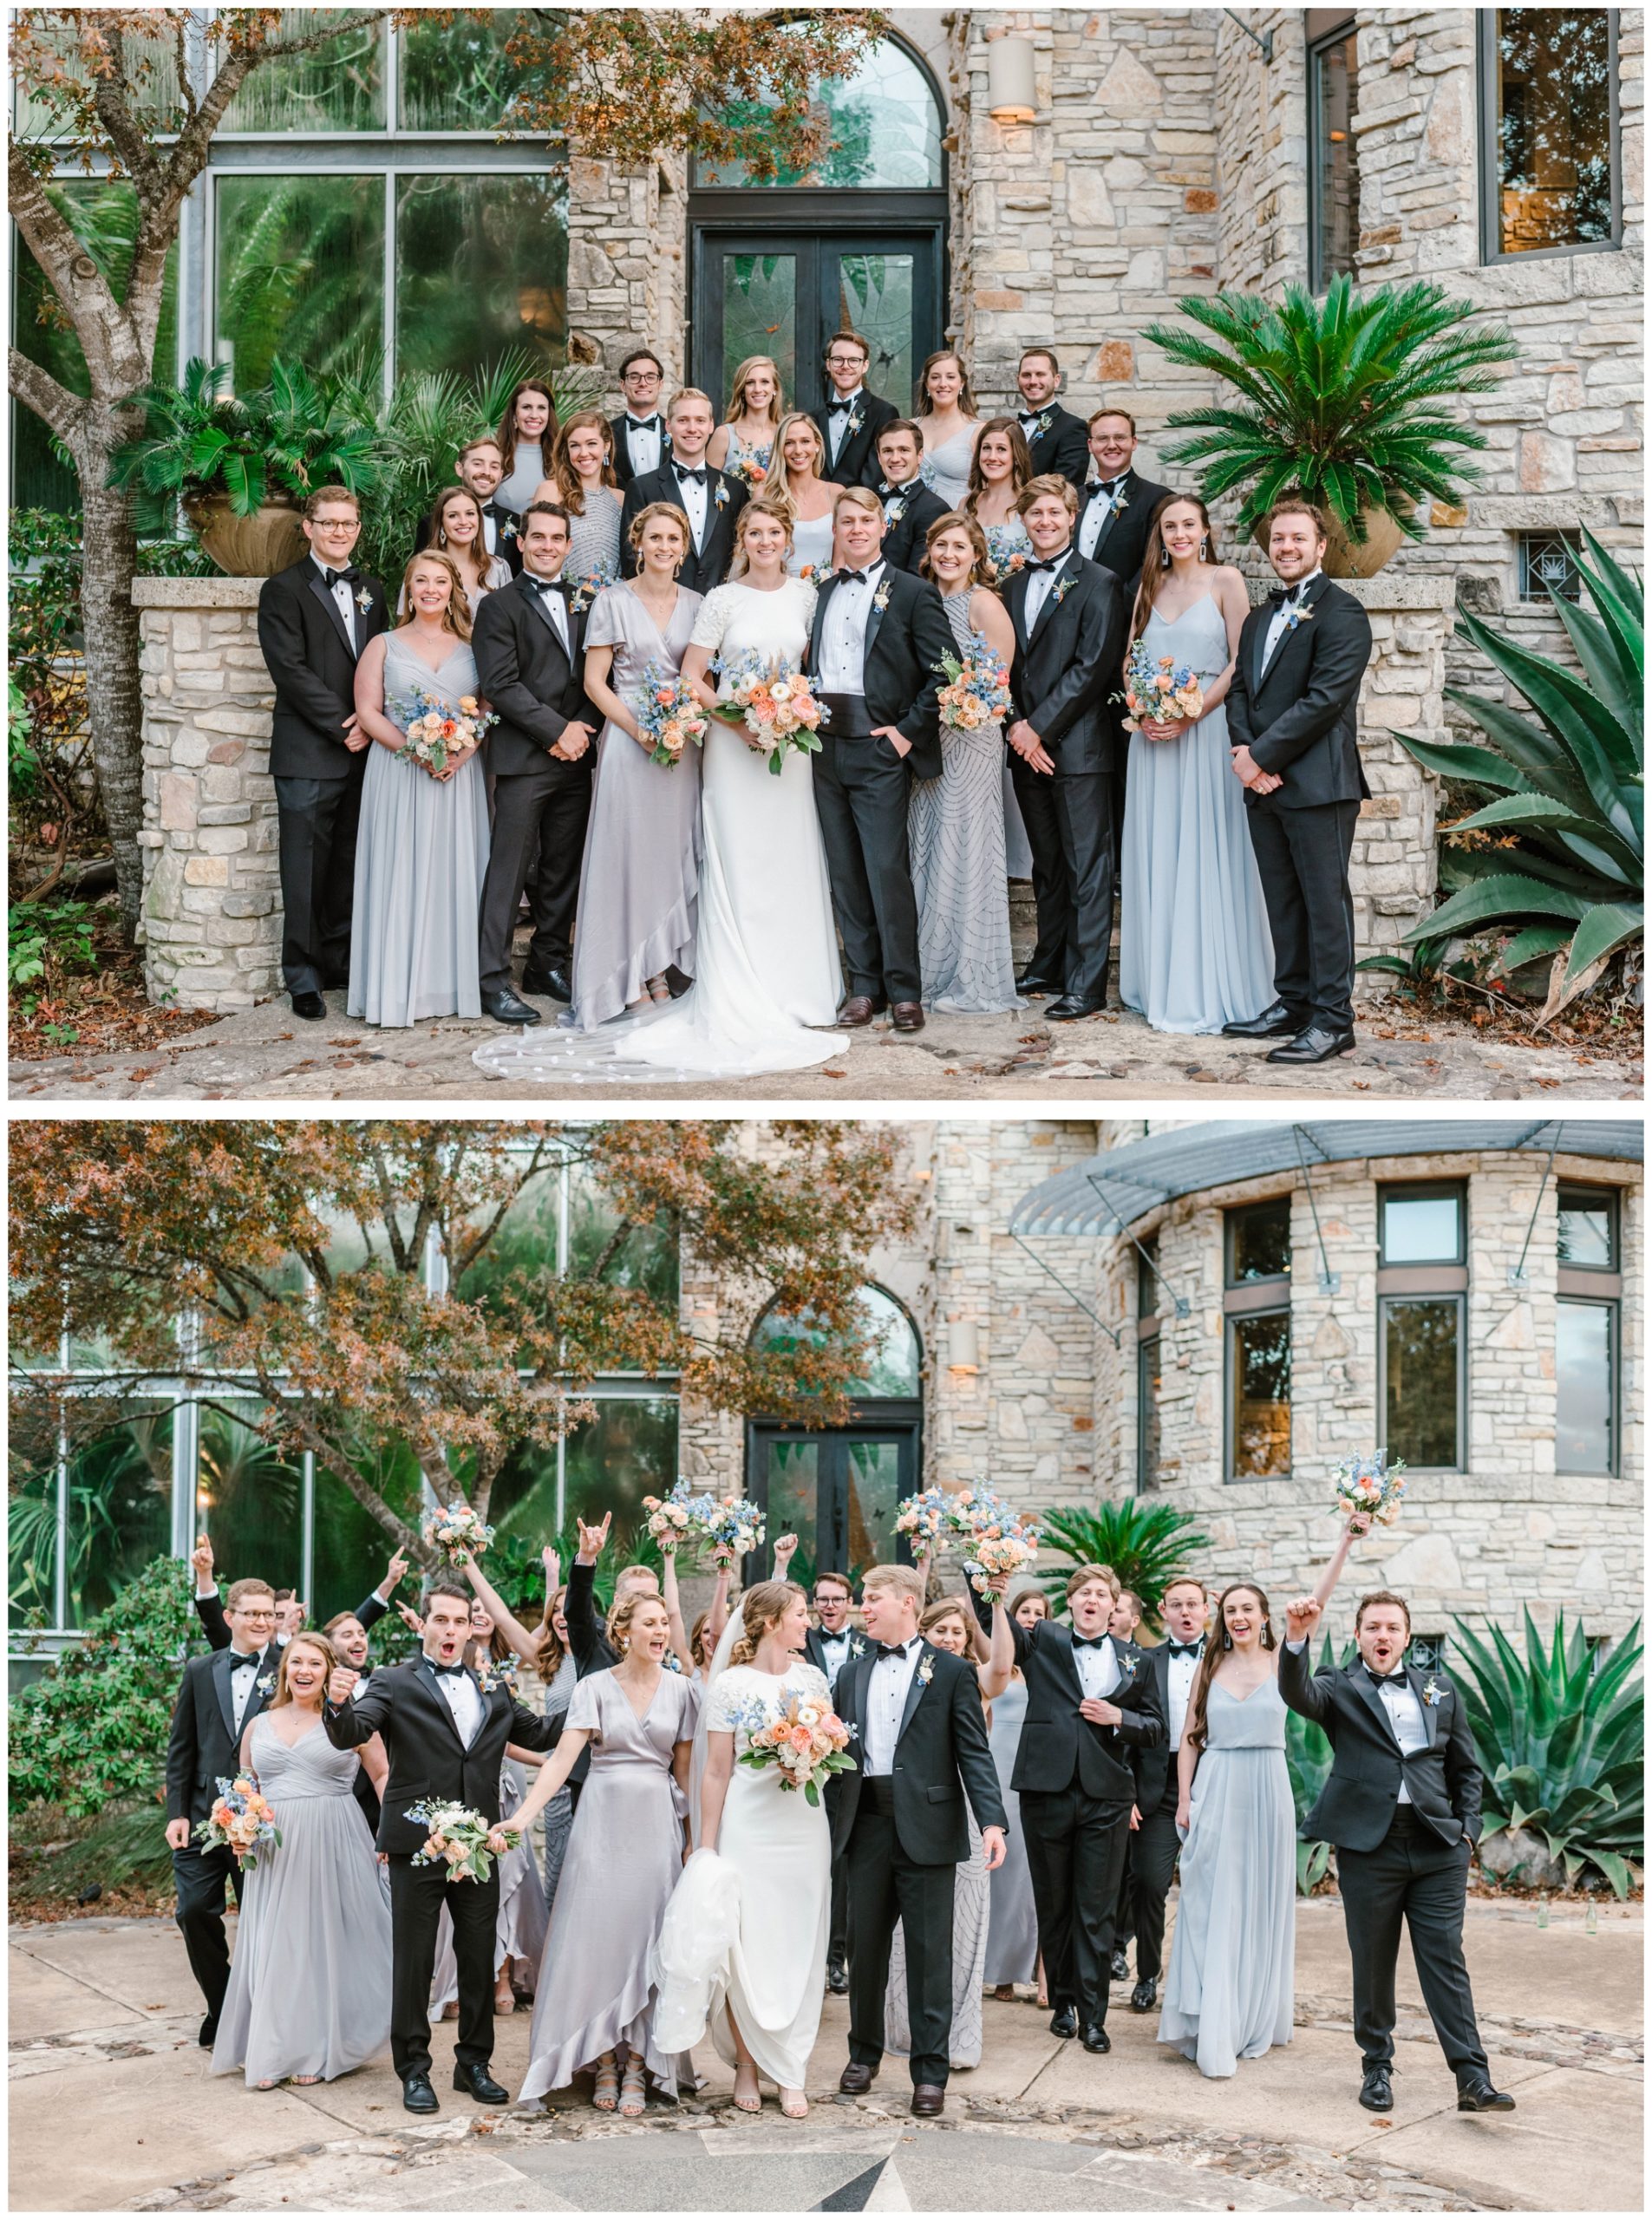 Fall wedding ceremony at The Greenhouse at Driftwood in Austin Texas | Joslyn Holtfort Photography